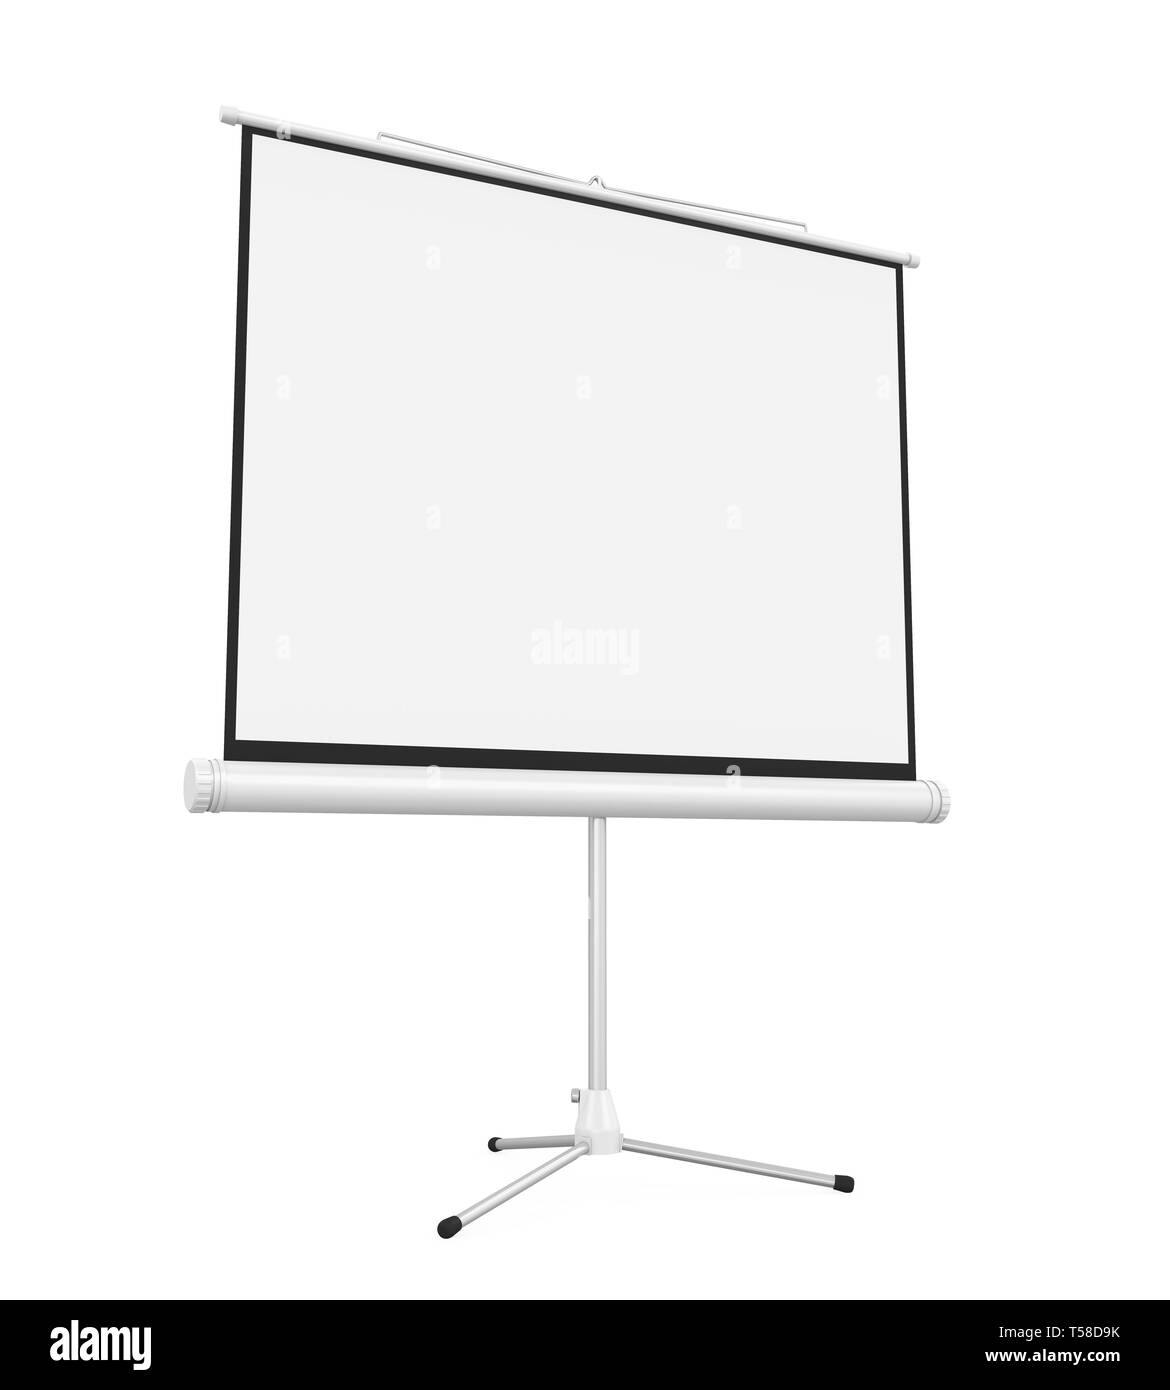 Blank Projector Screen Isolated Stock Photo